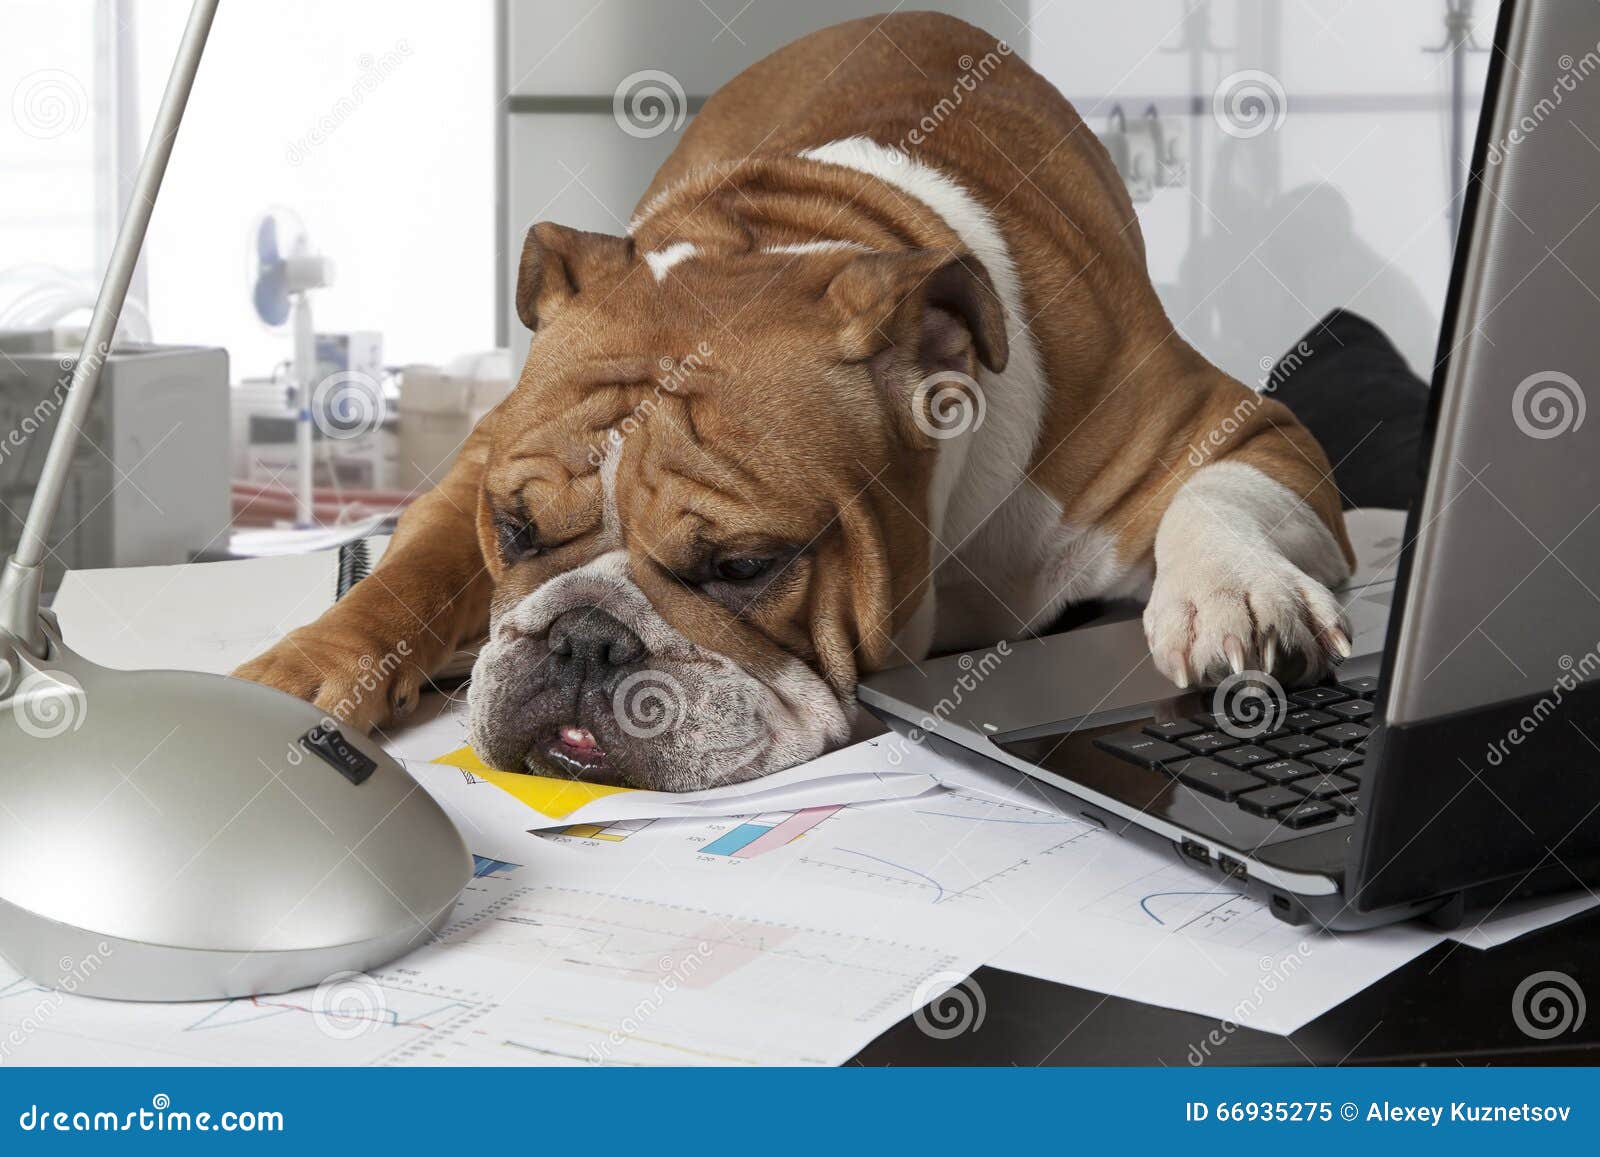 Busy day in the office stock image. Image of english